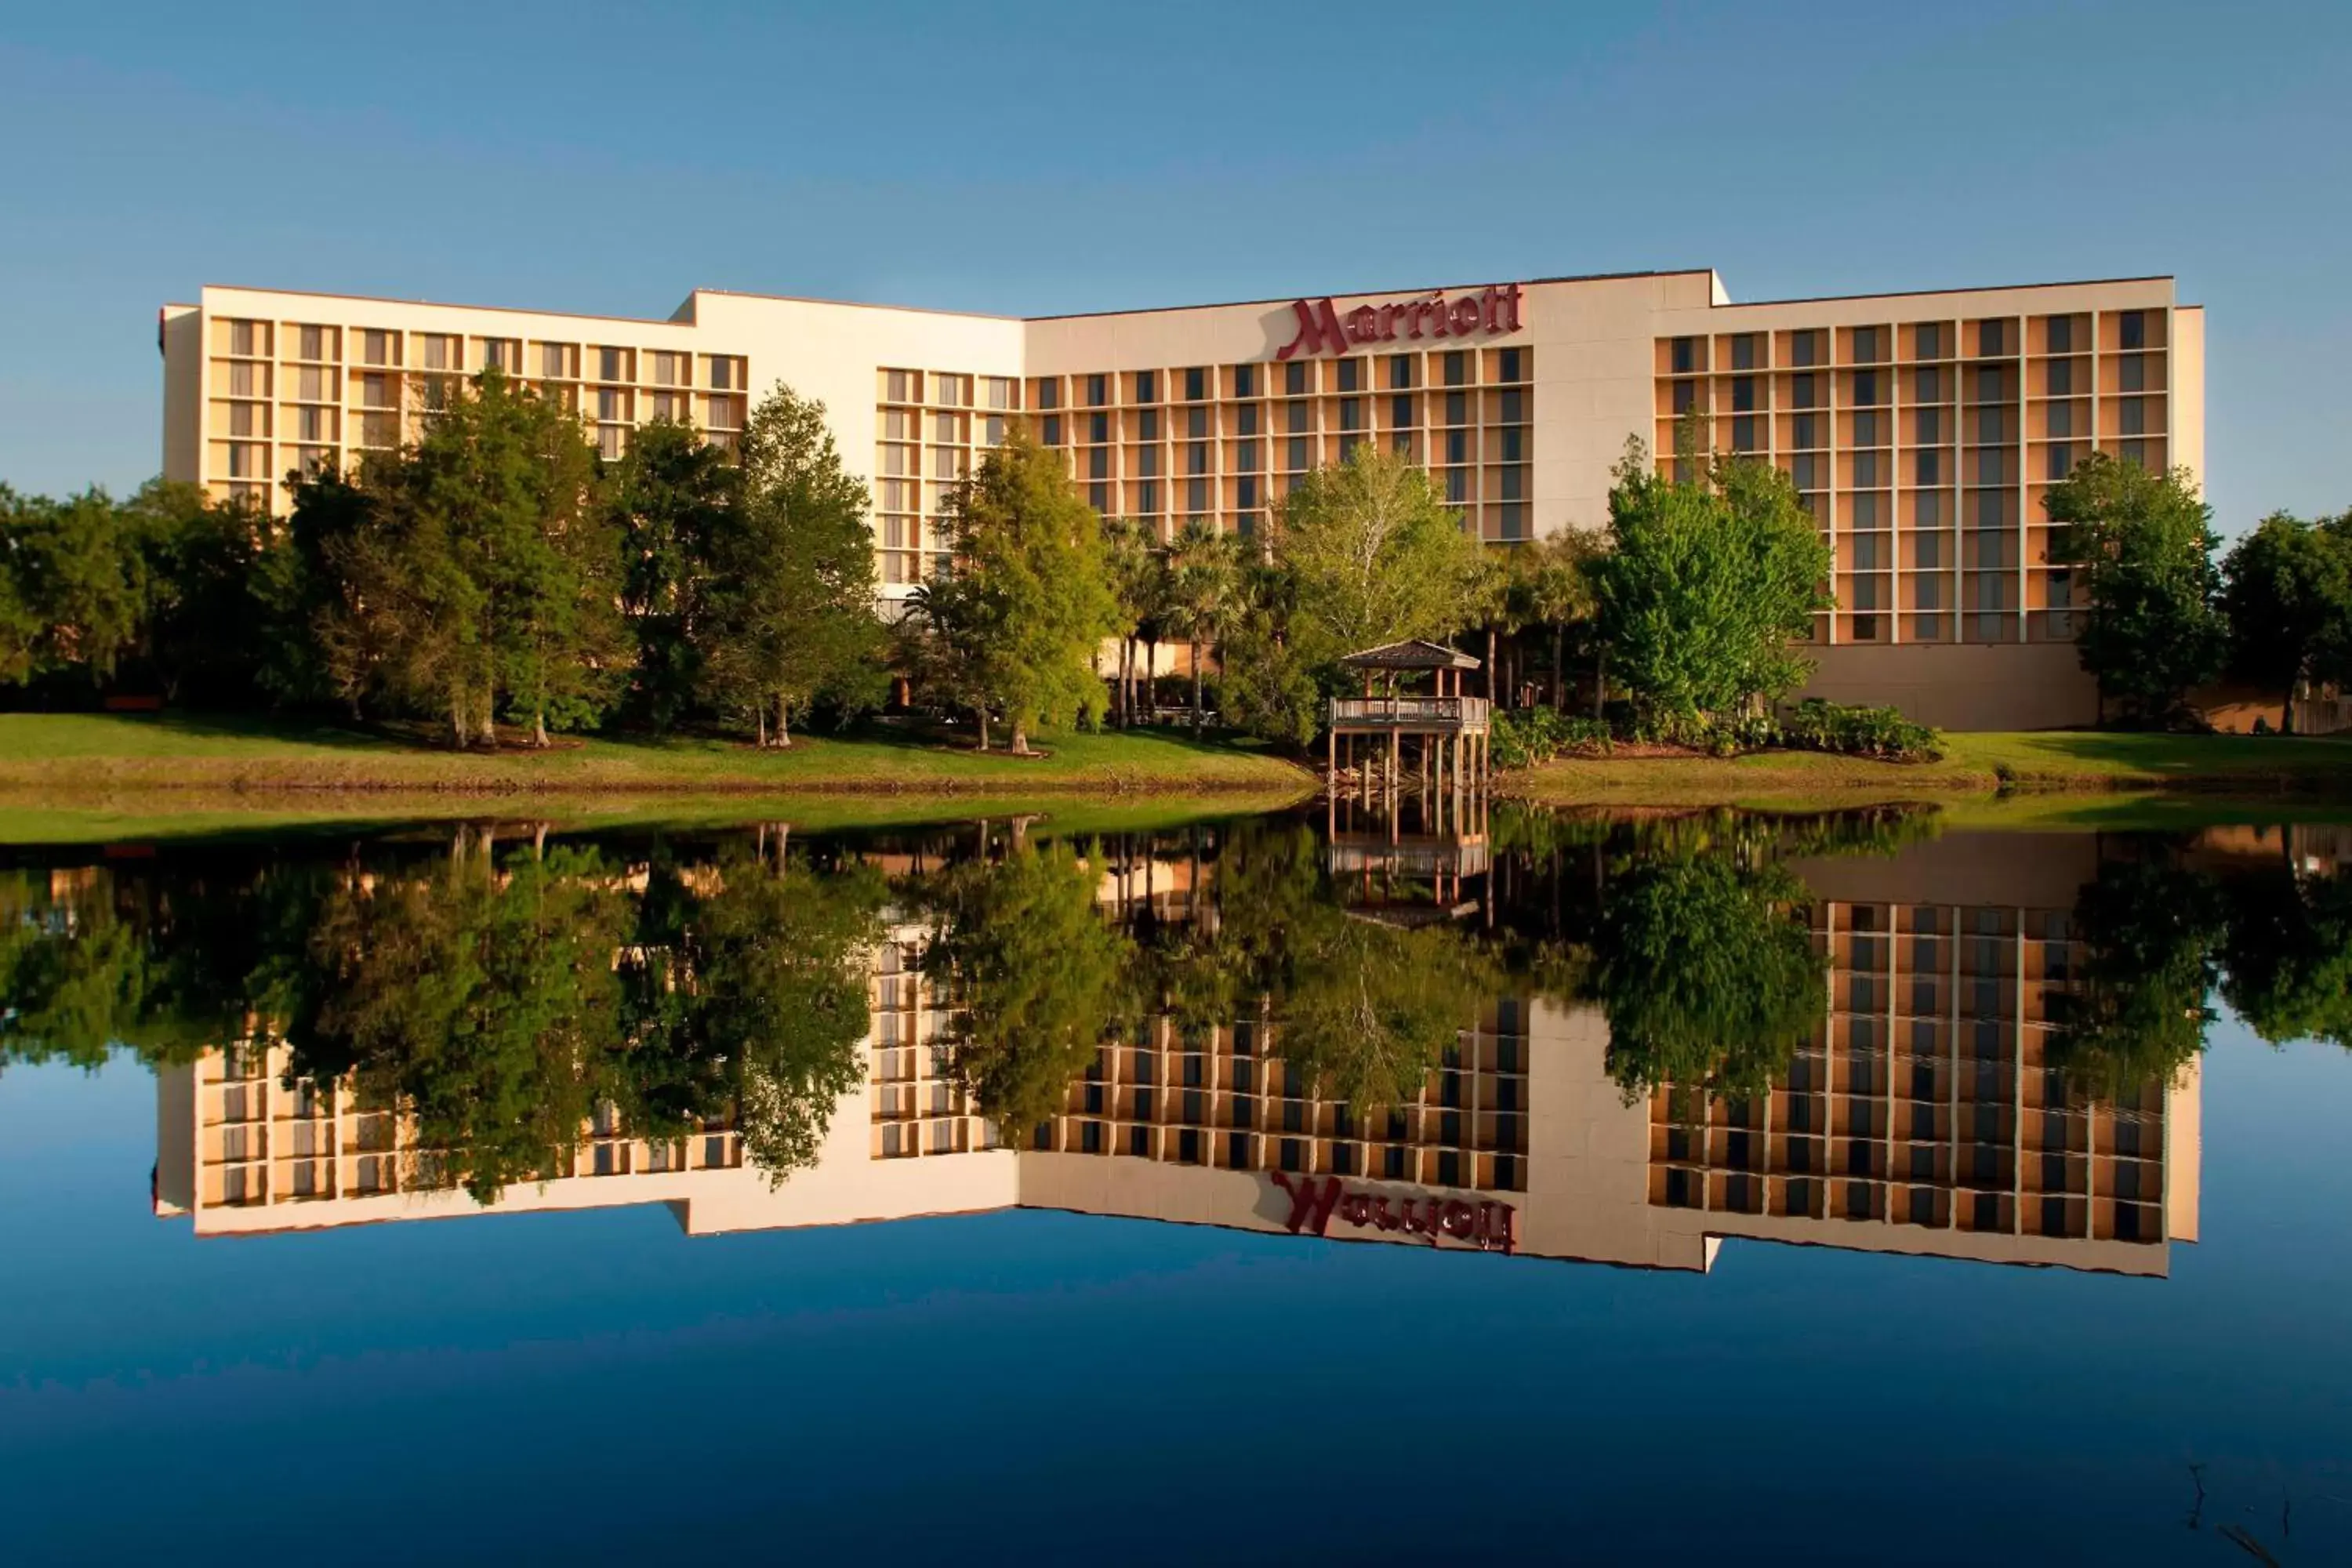 Property building, Swimming Pool in Marriott Orlando Airport Lakeside